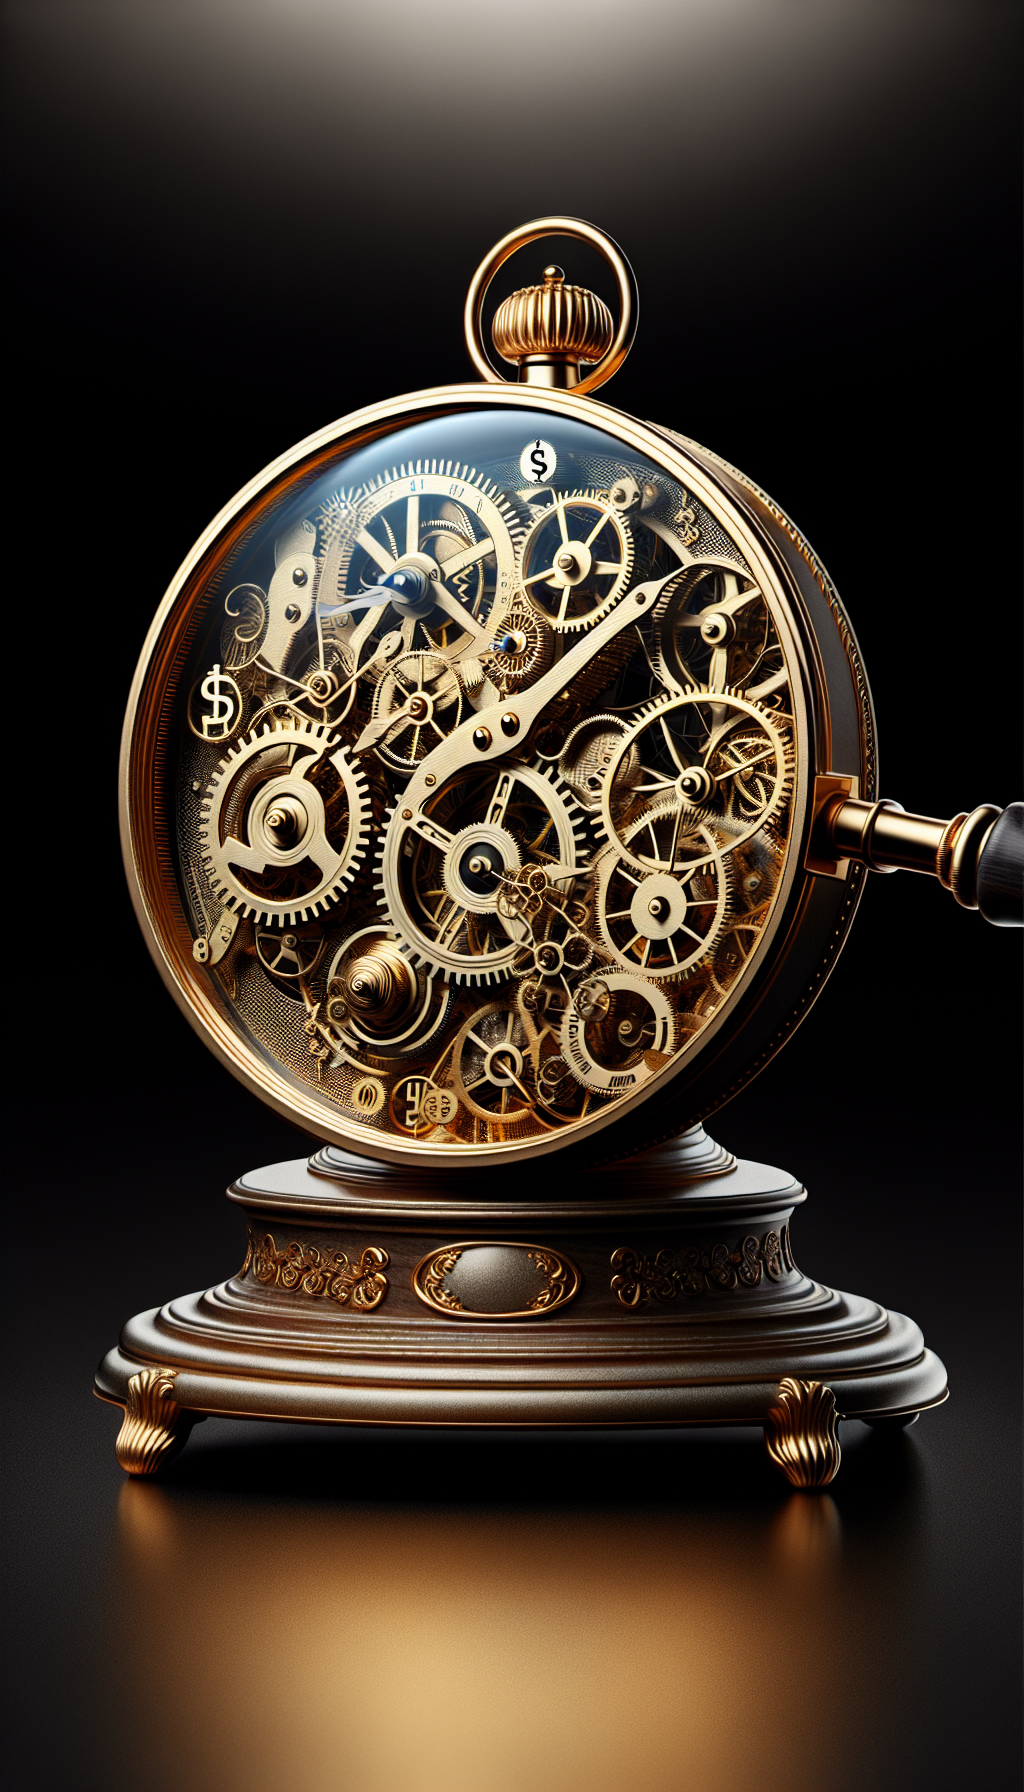 An antique mantel clock, its face partially translucent, reveals an intricate network of interlocking gears and springs, shimmering with a golden hue to denote value. A magnifying glass hovers above, allowing a closer look at the delicate balance wheel, highlighting the precise craftsmanship. The surrounding gears subtly morph into currency symbols to connote the clock's inherent worth.